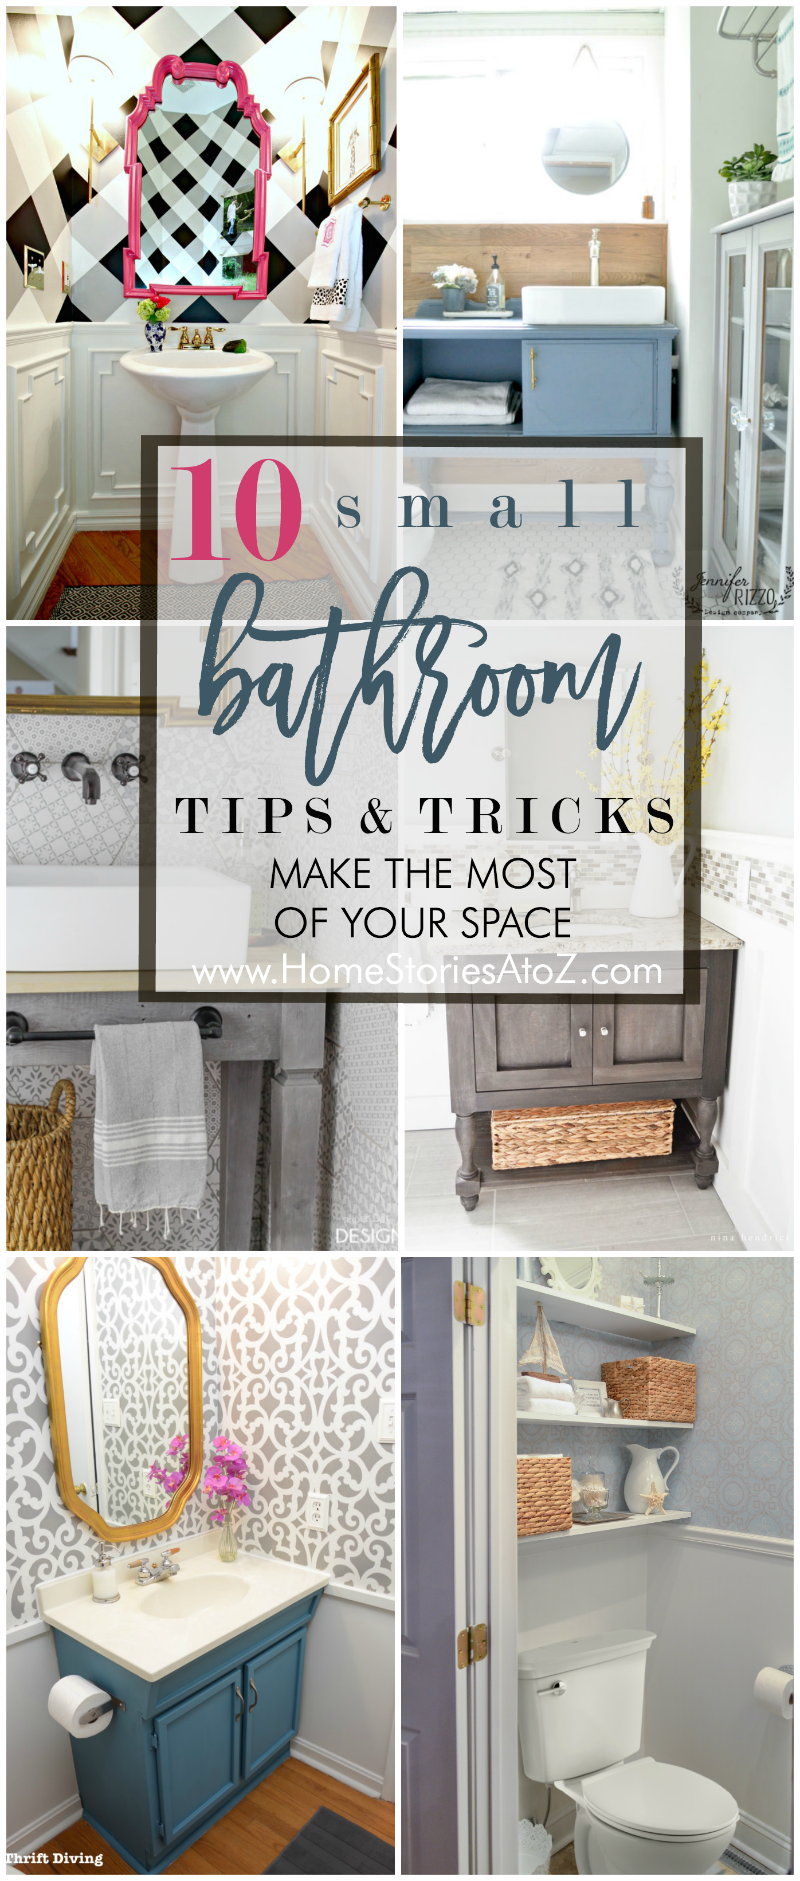 10-small-bathroom-tips-and-tricks